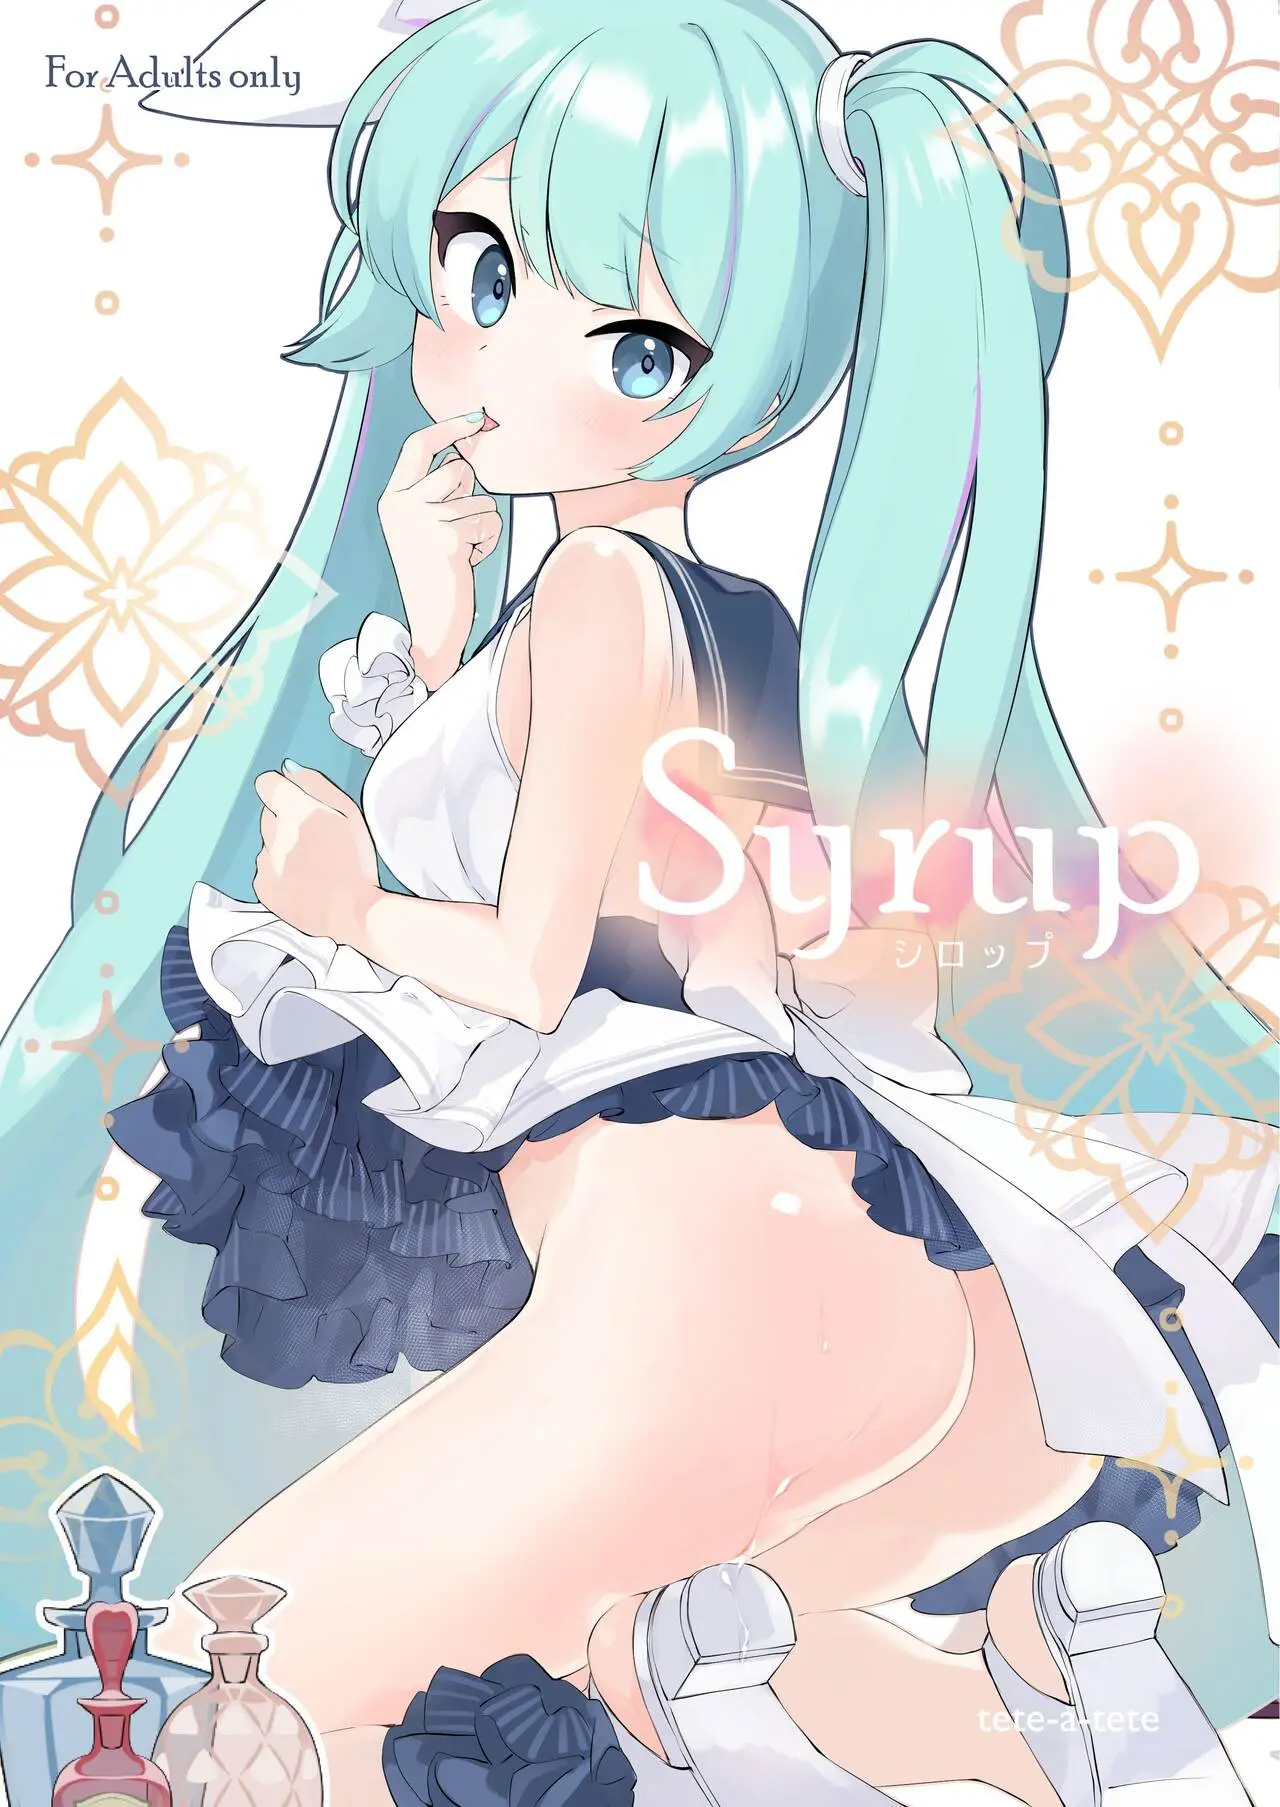 Syrup VOCALOID-1